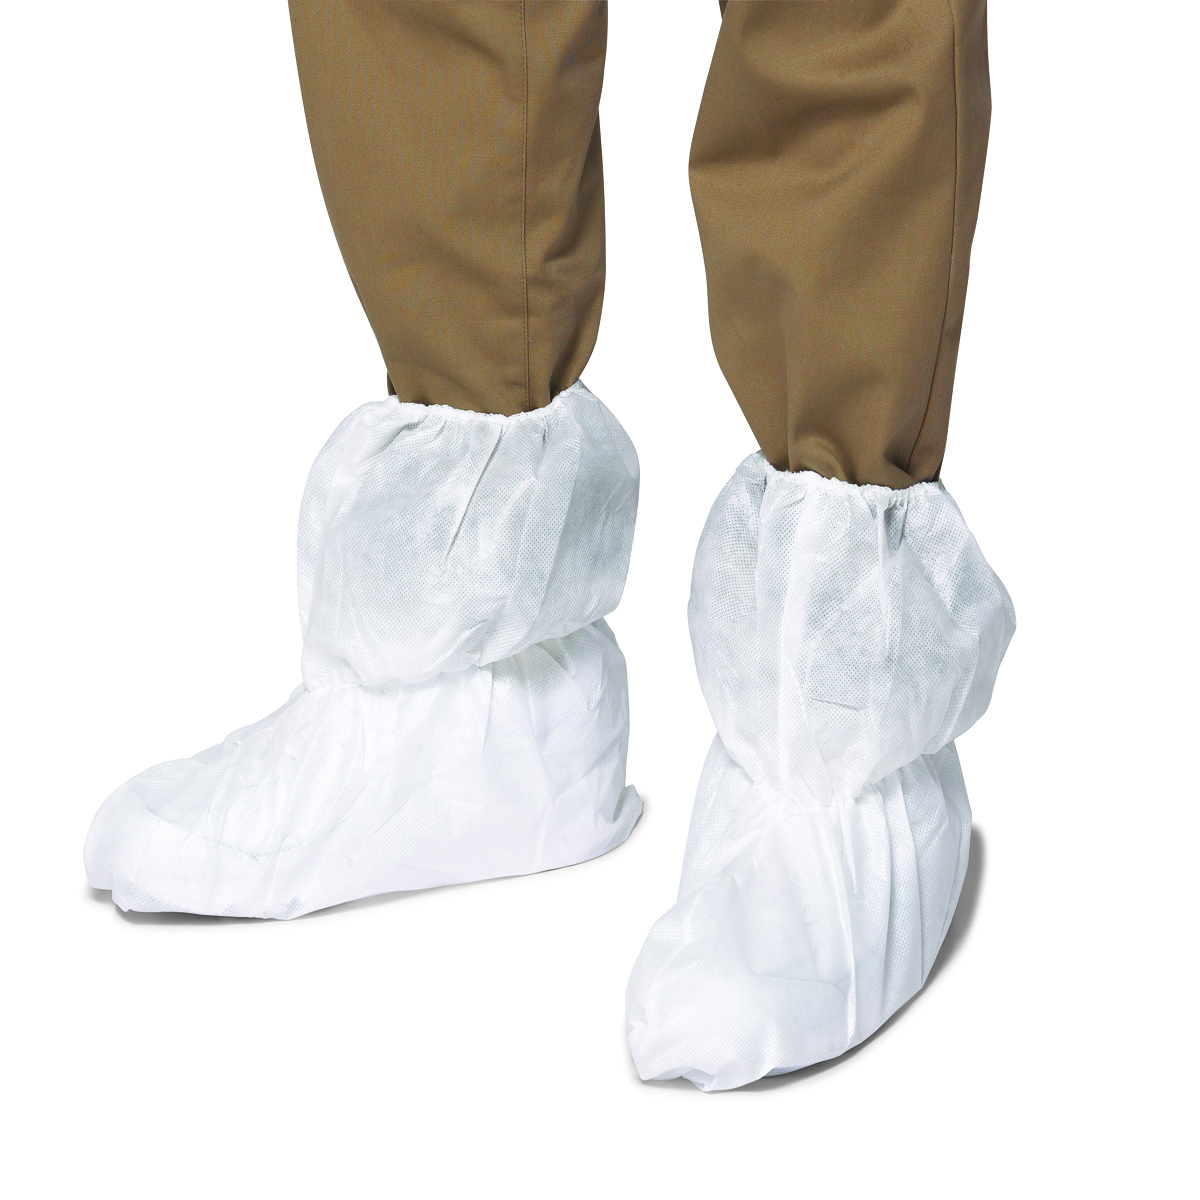 DuPont™ Large White Proshield® 30 Polypropylene Disposable Shoe Cover (Availability restrictions apply.)